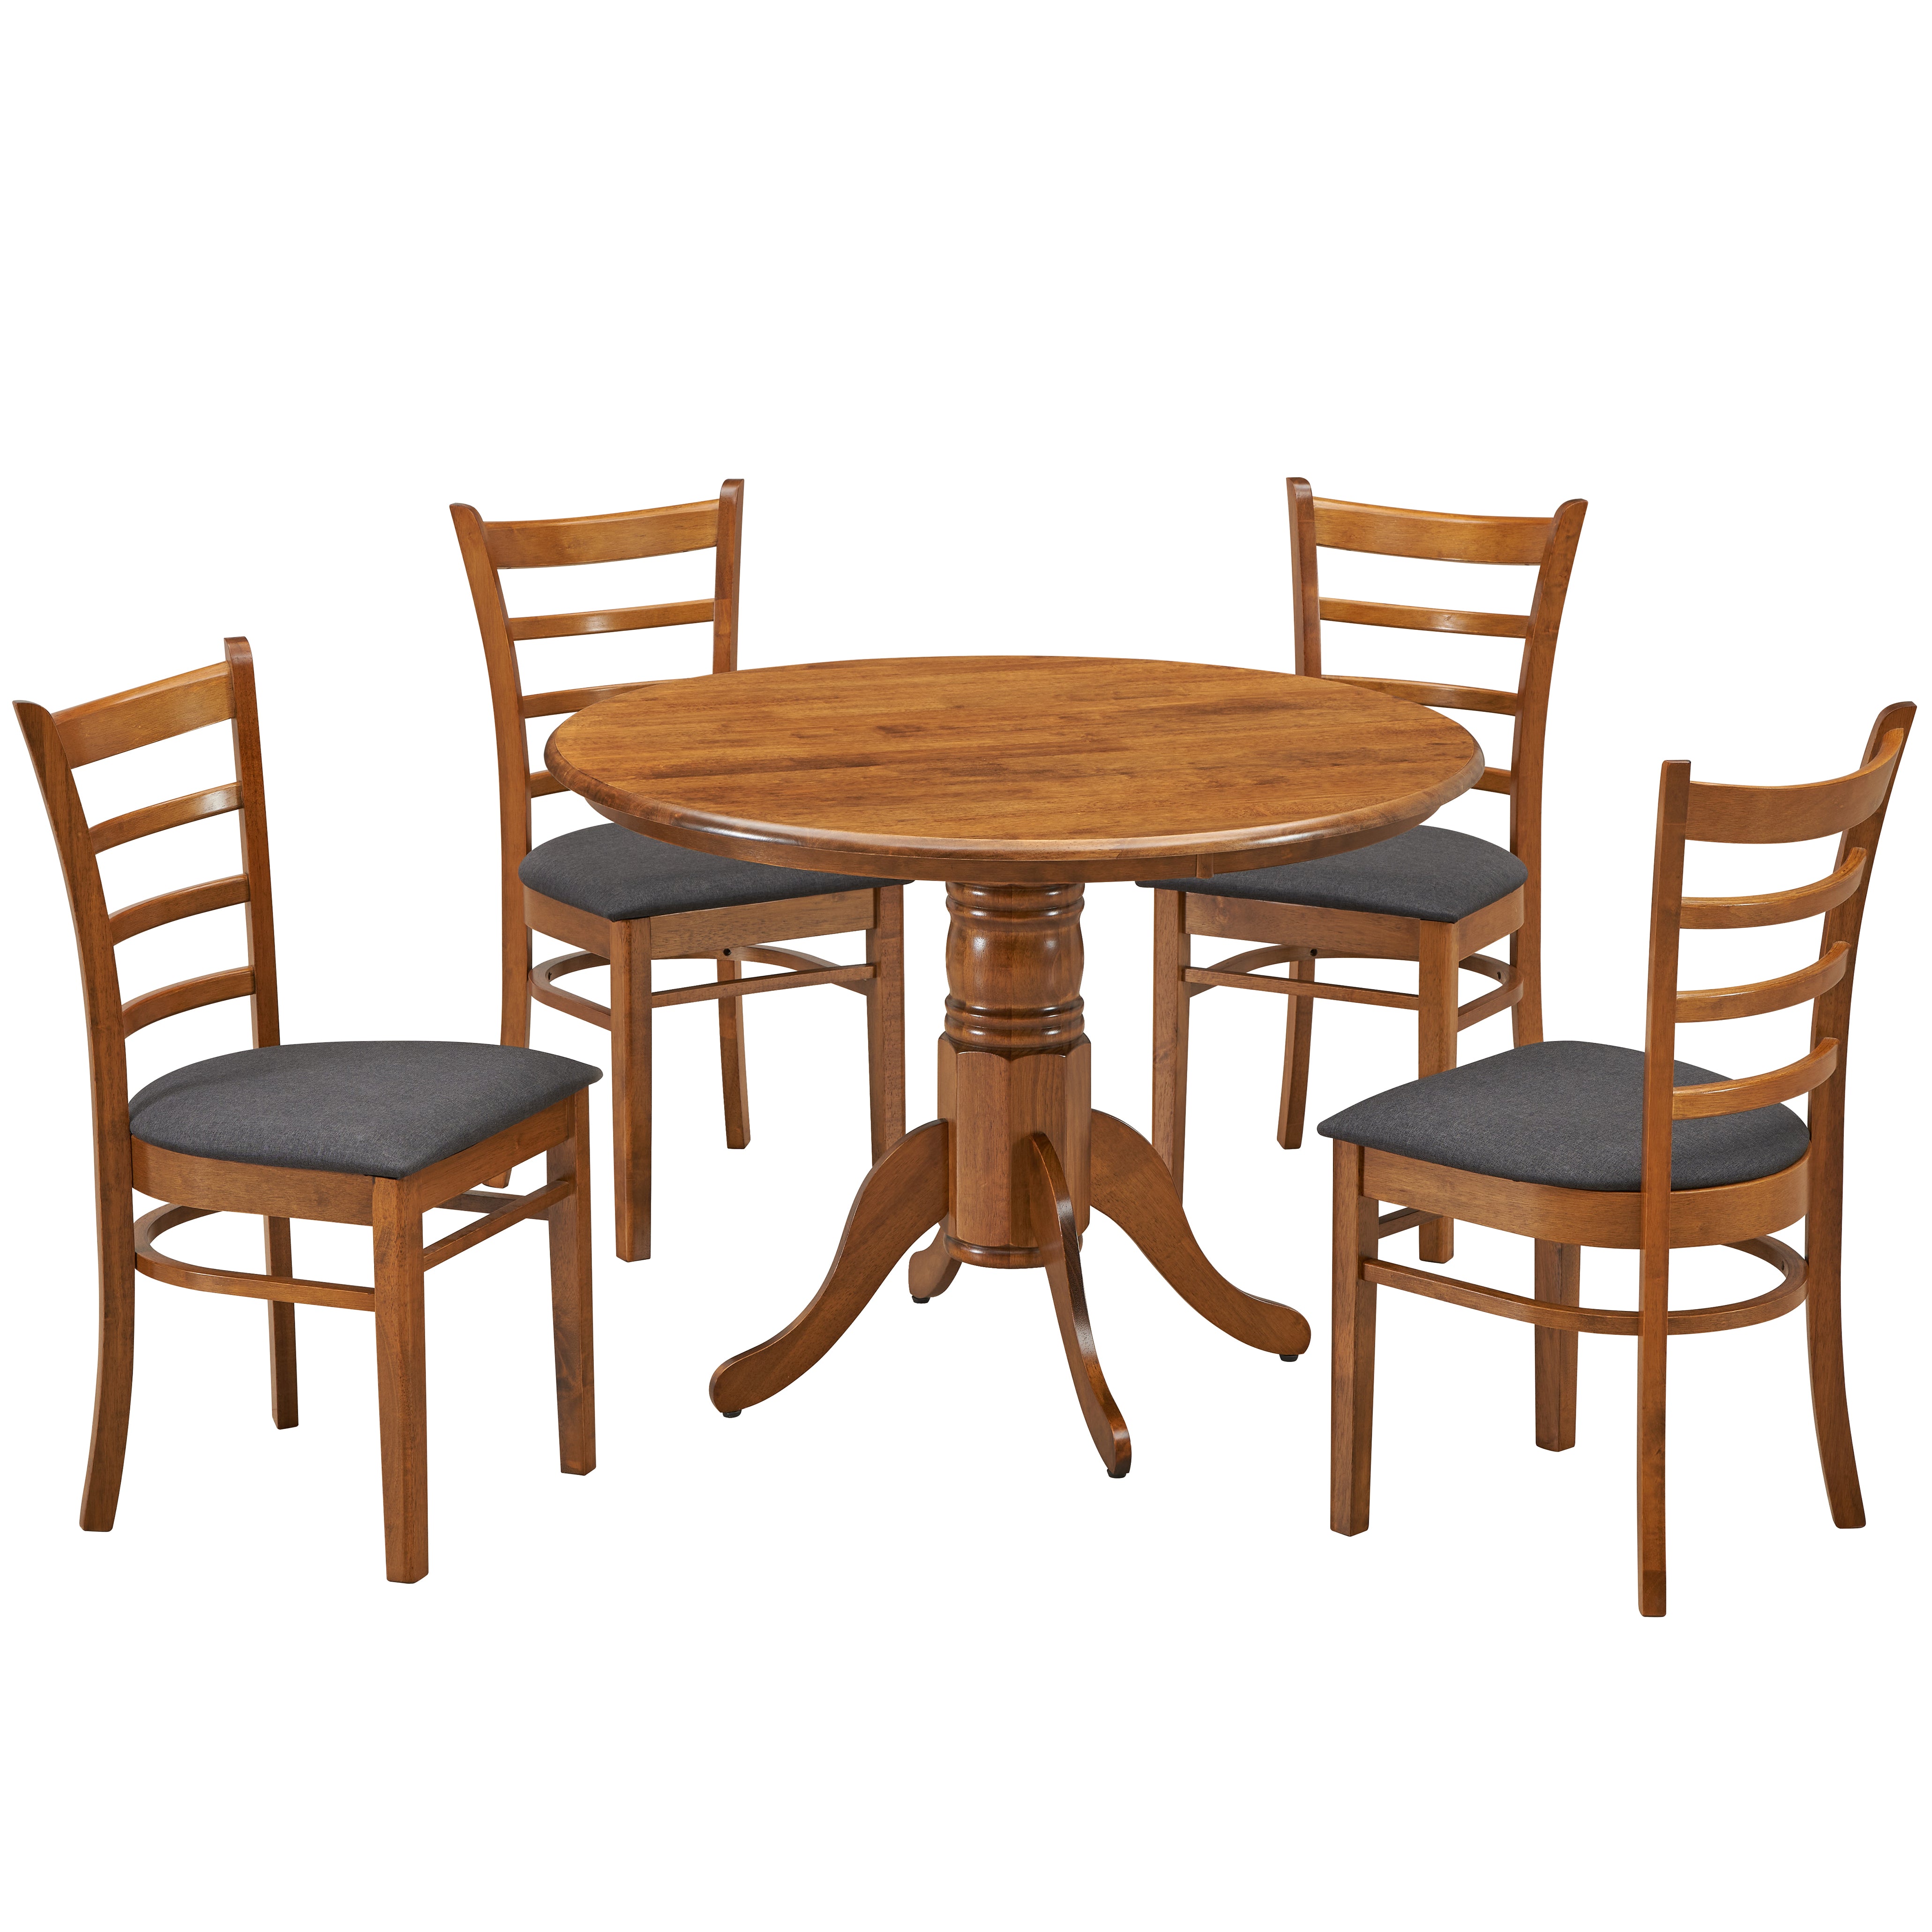 Linaria 5pc Dining Set 106cm Round Pedestral Table 4 Fabric Seat Chair - Walnut - SILBERSHELL